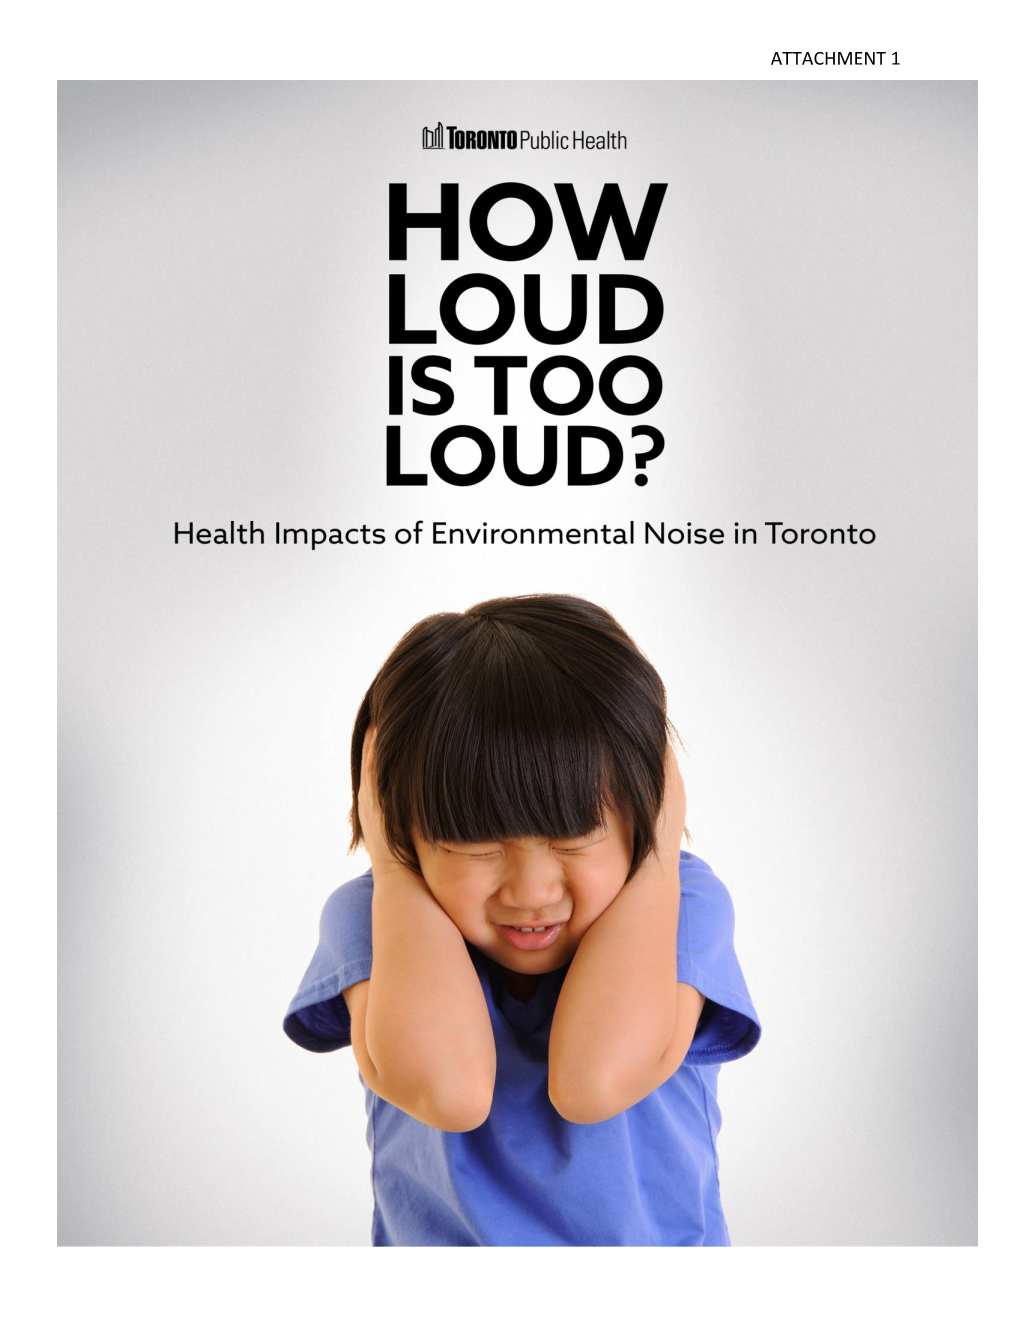 Health Impacts of Environmental Noise in Toronto